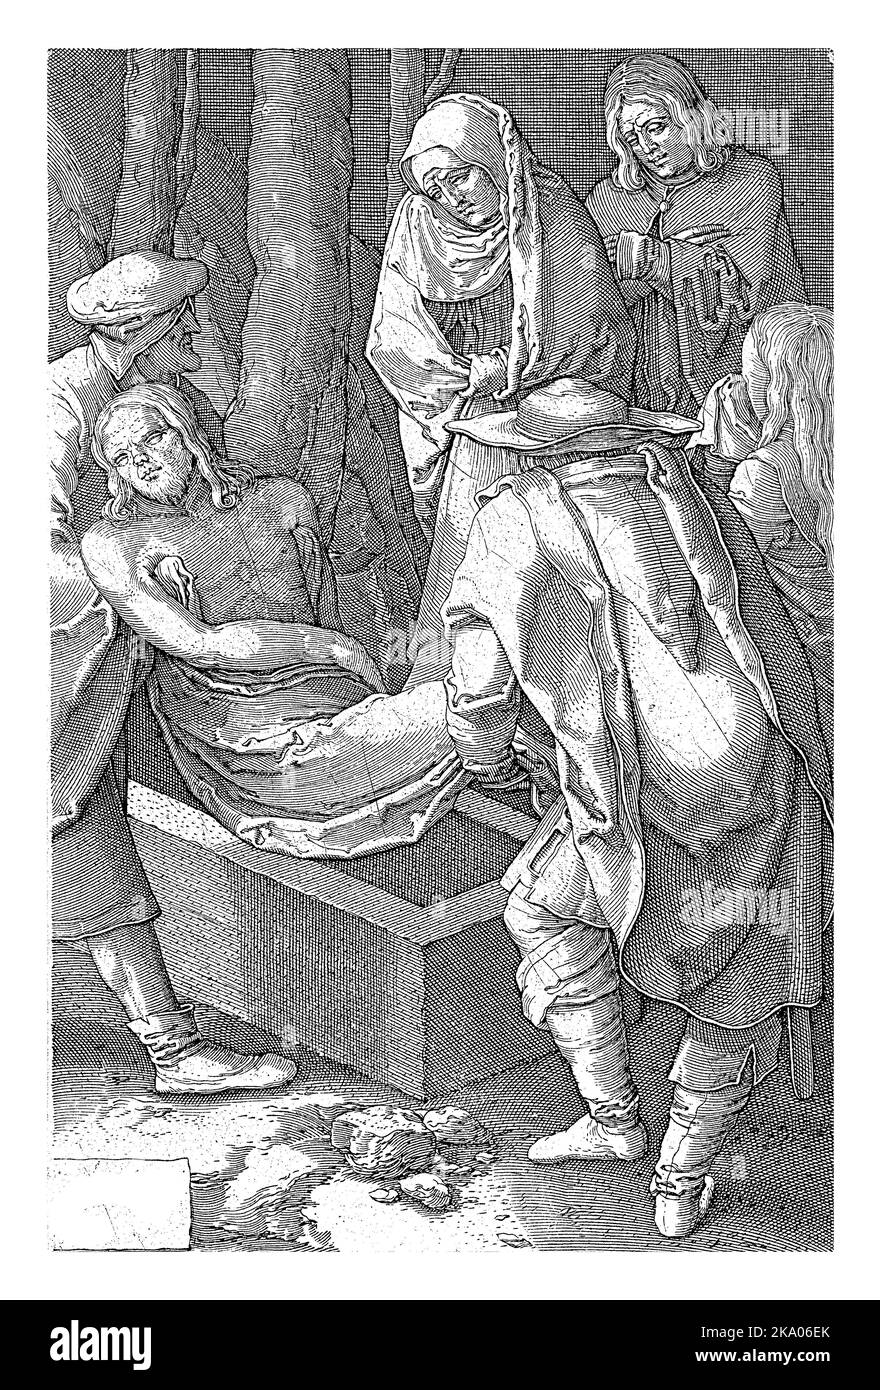 Entombment, Jan Harmensz. Muller, after Lucas van Leyden, 1613 - 1622 Joseph of Arimatea and Nicodemus lift the body of Christ into the tomb. In the b Stock Photo